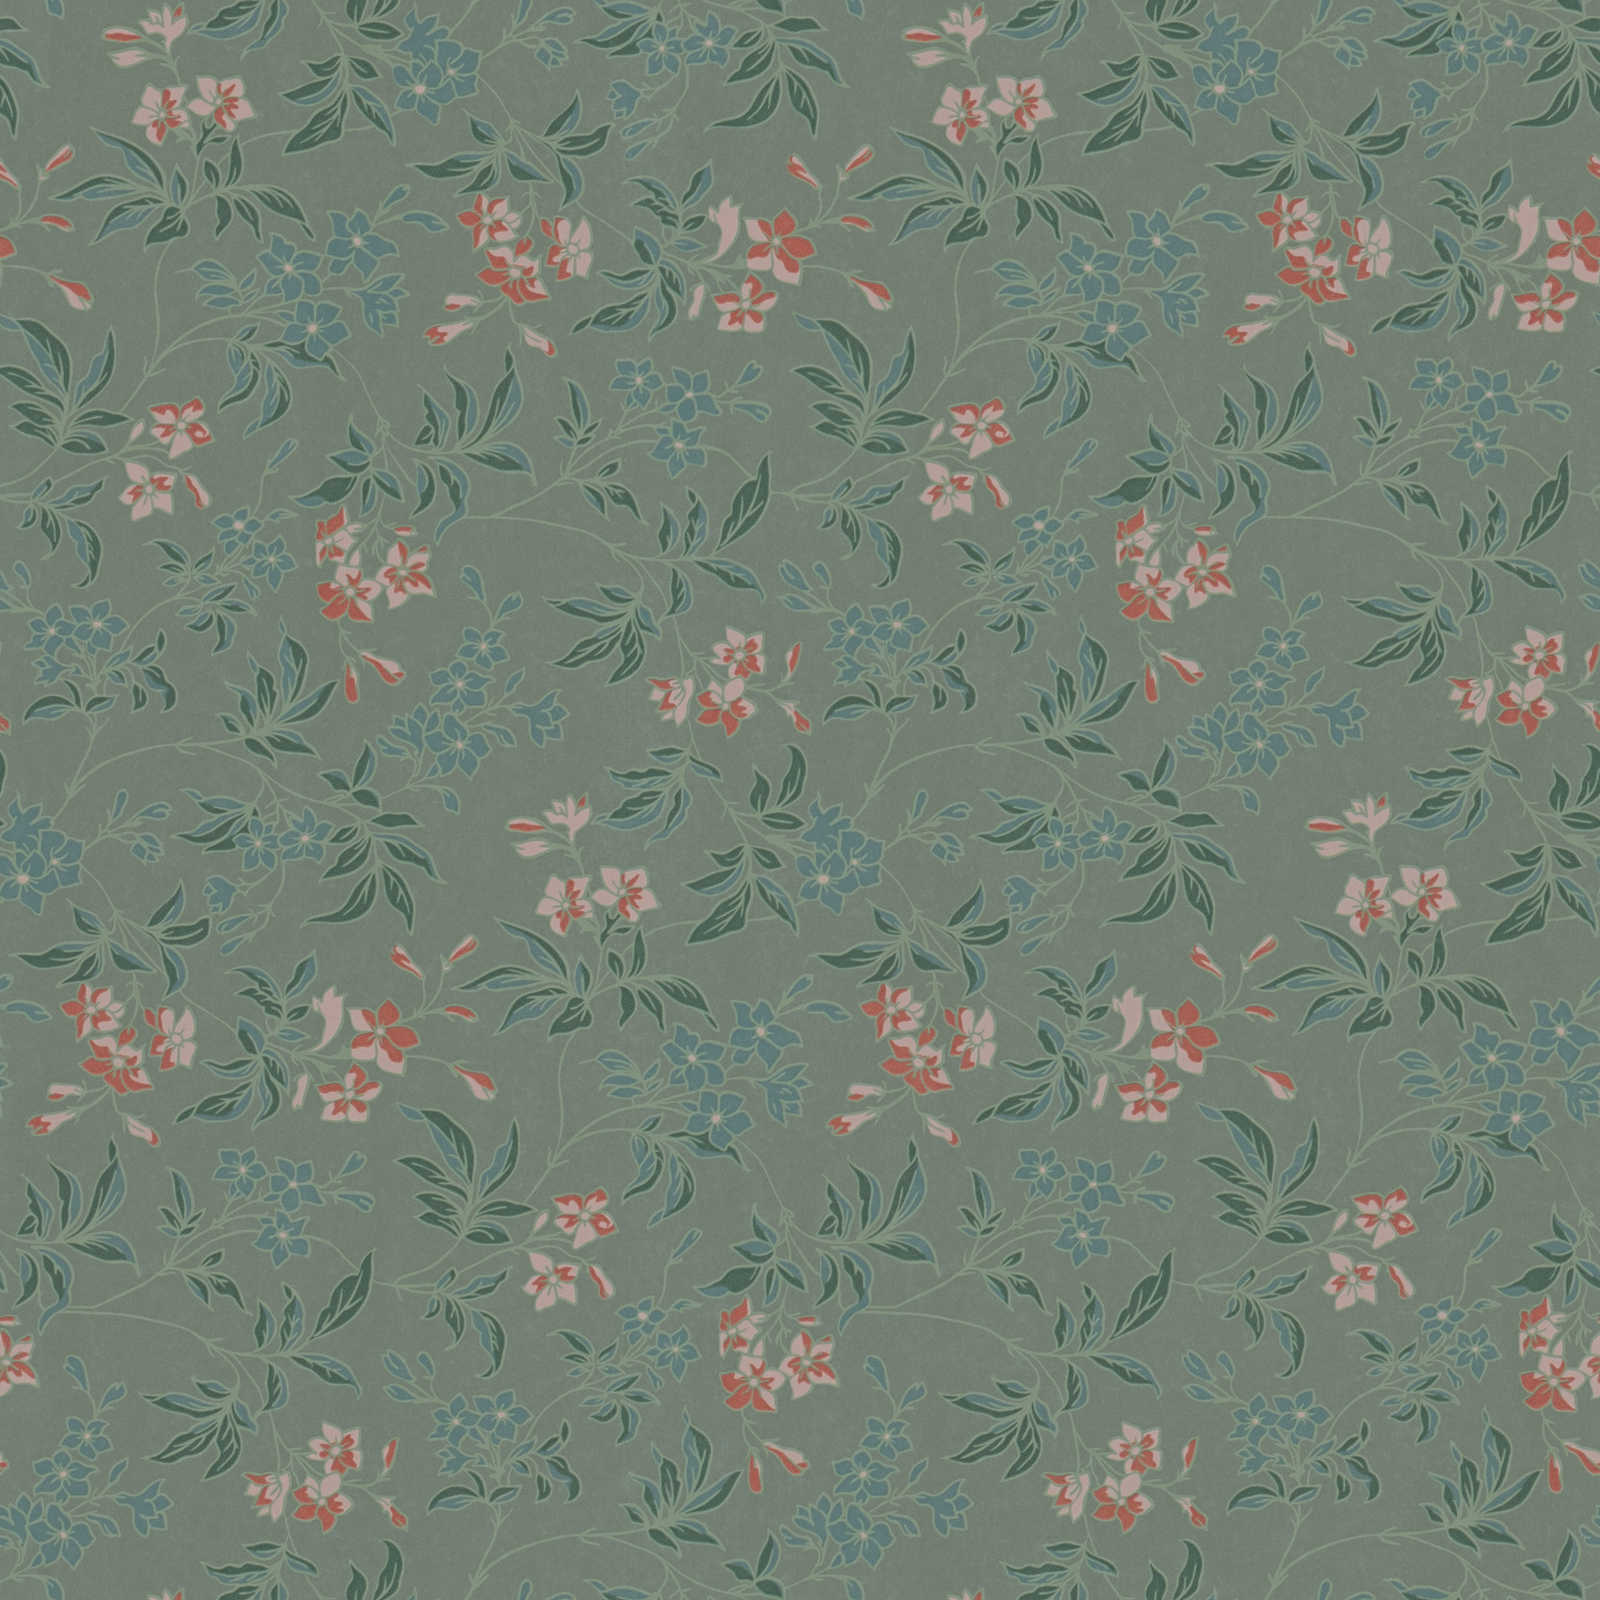         Floral wallpaper with flowers and vines - green, orange, pink
    